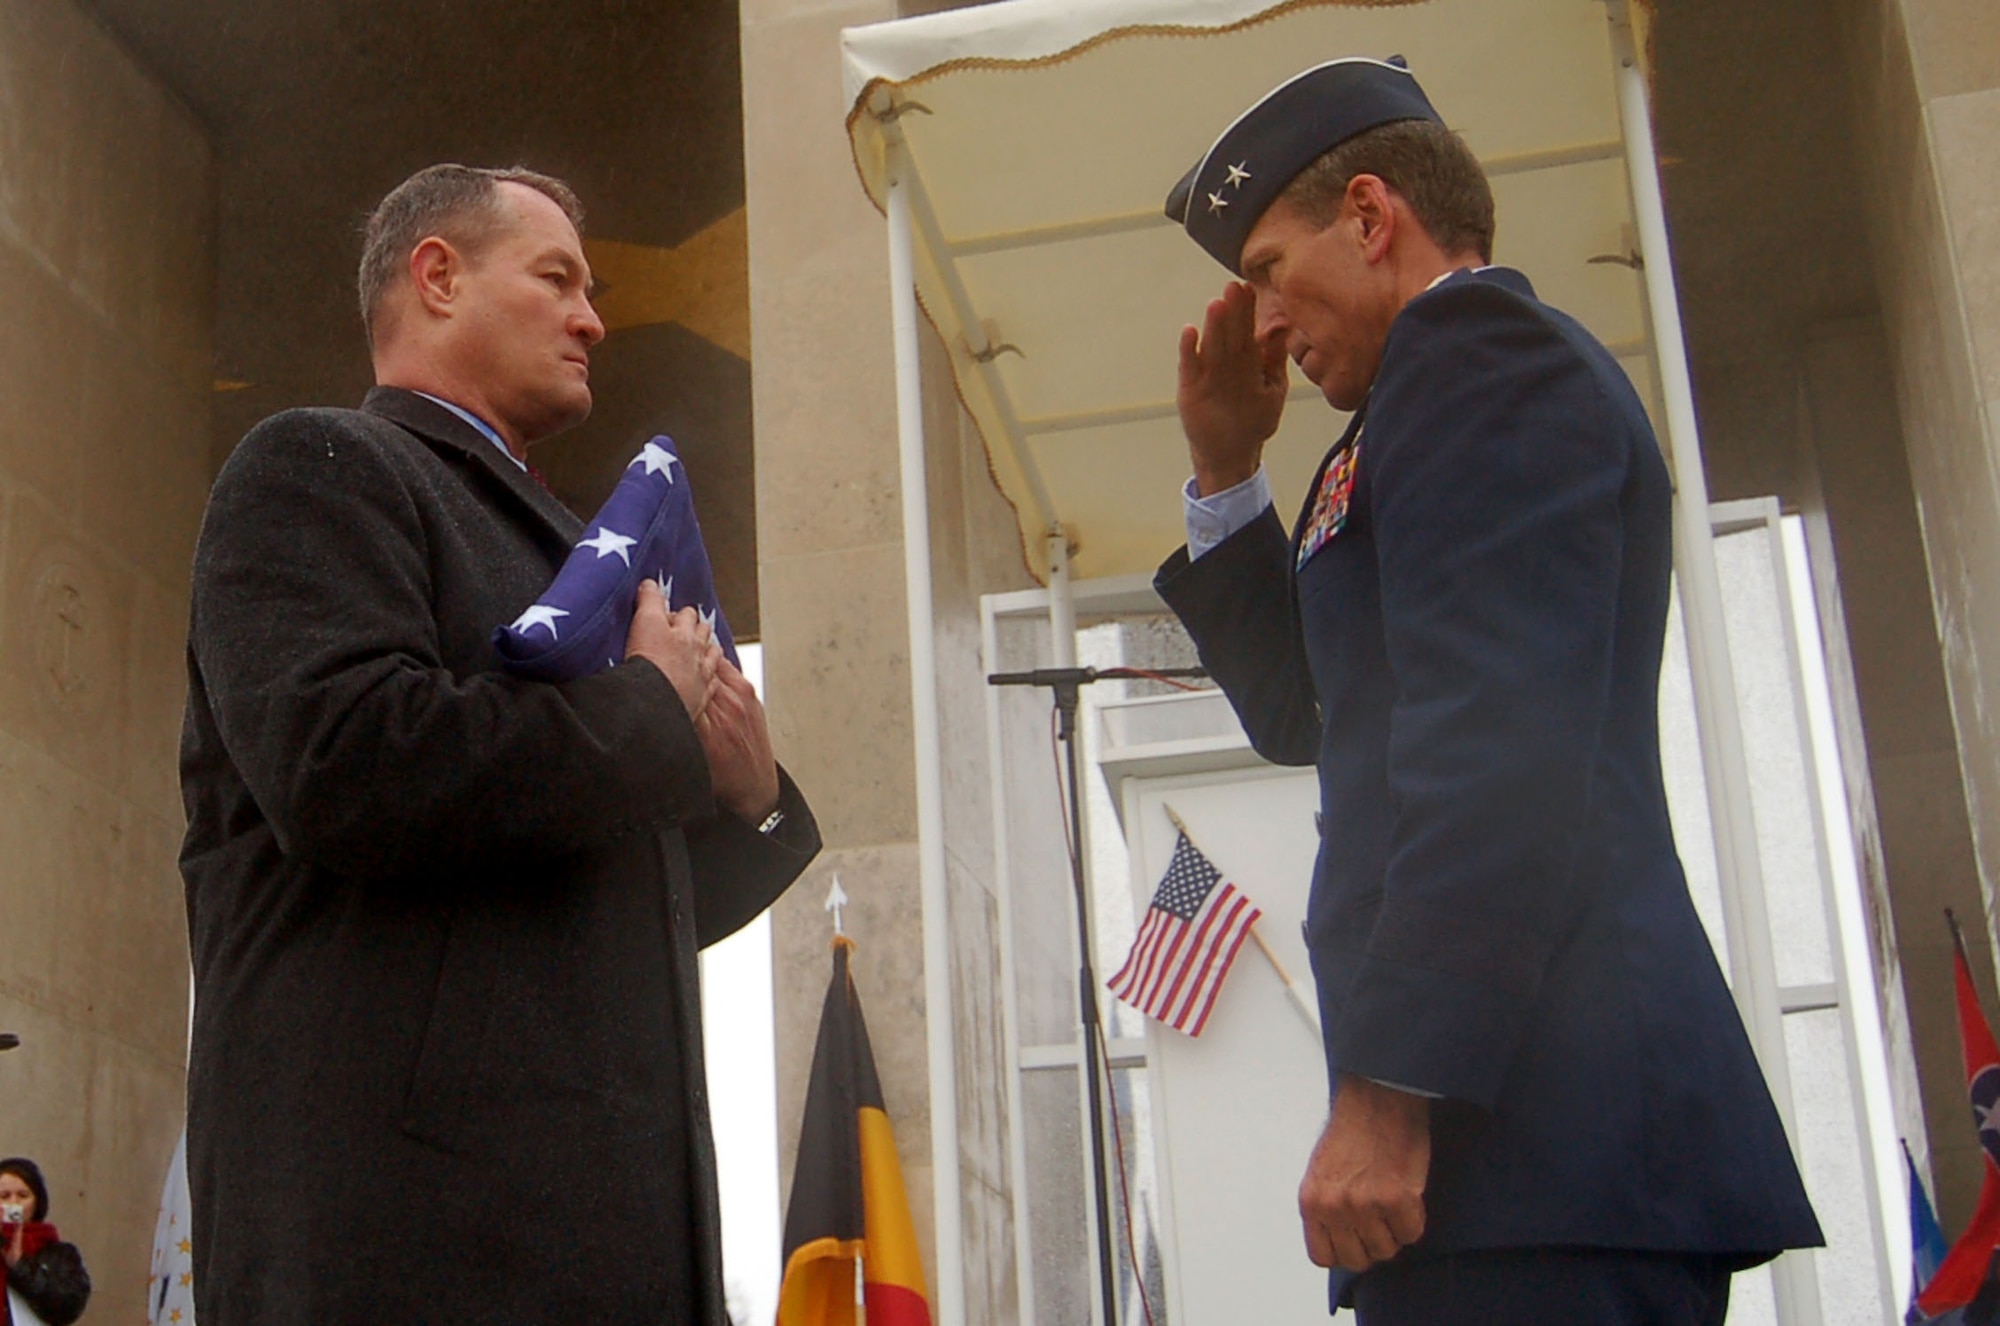 HENRI-CHAPELLE, Belgium -- Maj. Gen. Thomas B. Wright, operations deputy chief of staff of operations for Supreme Headquarters Allied Powers Europe, NATO, salutes a folded flag held by U.S. Army Retired Brig. Gen. Steven R. Hawkins, director of the European region for the American Battle Monuments Commission, to pay respects Feb. 20, 2009, to the nine fallen Airmen of the McMurray Crew in the Army Air Corps, who are no longer missing in action. The B-24 bomber crew’s remains were discovered after more than 60 years in a field southwest of Berlin. (U.S. Air Force photo by 2nd Lt. Kathleen Polesnak)